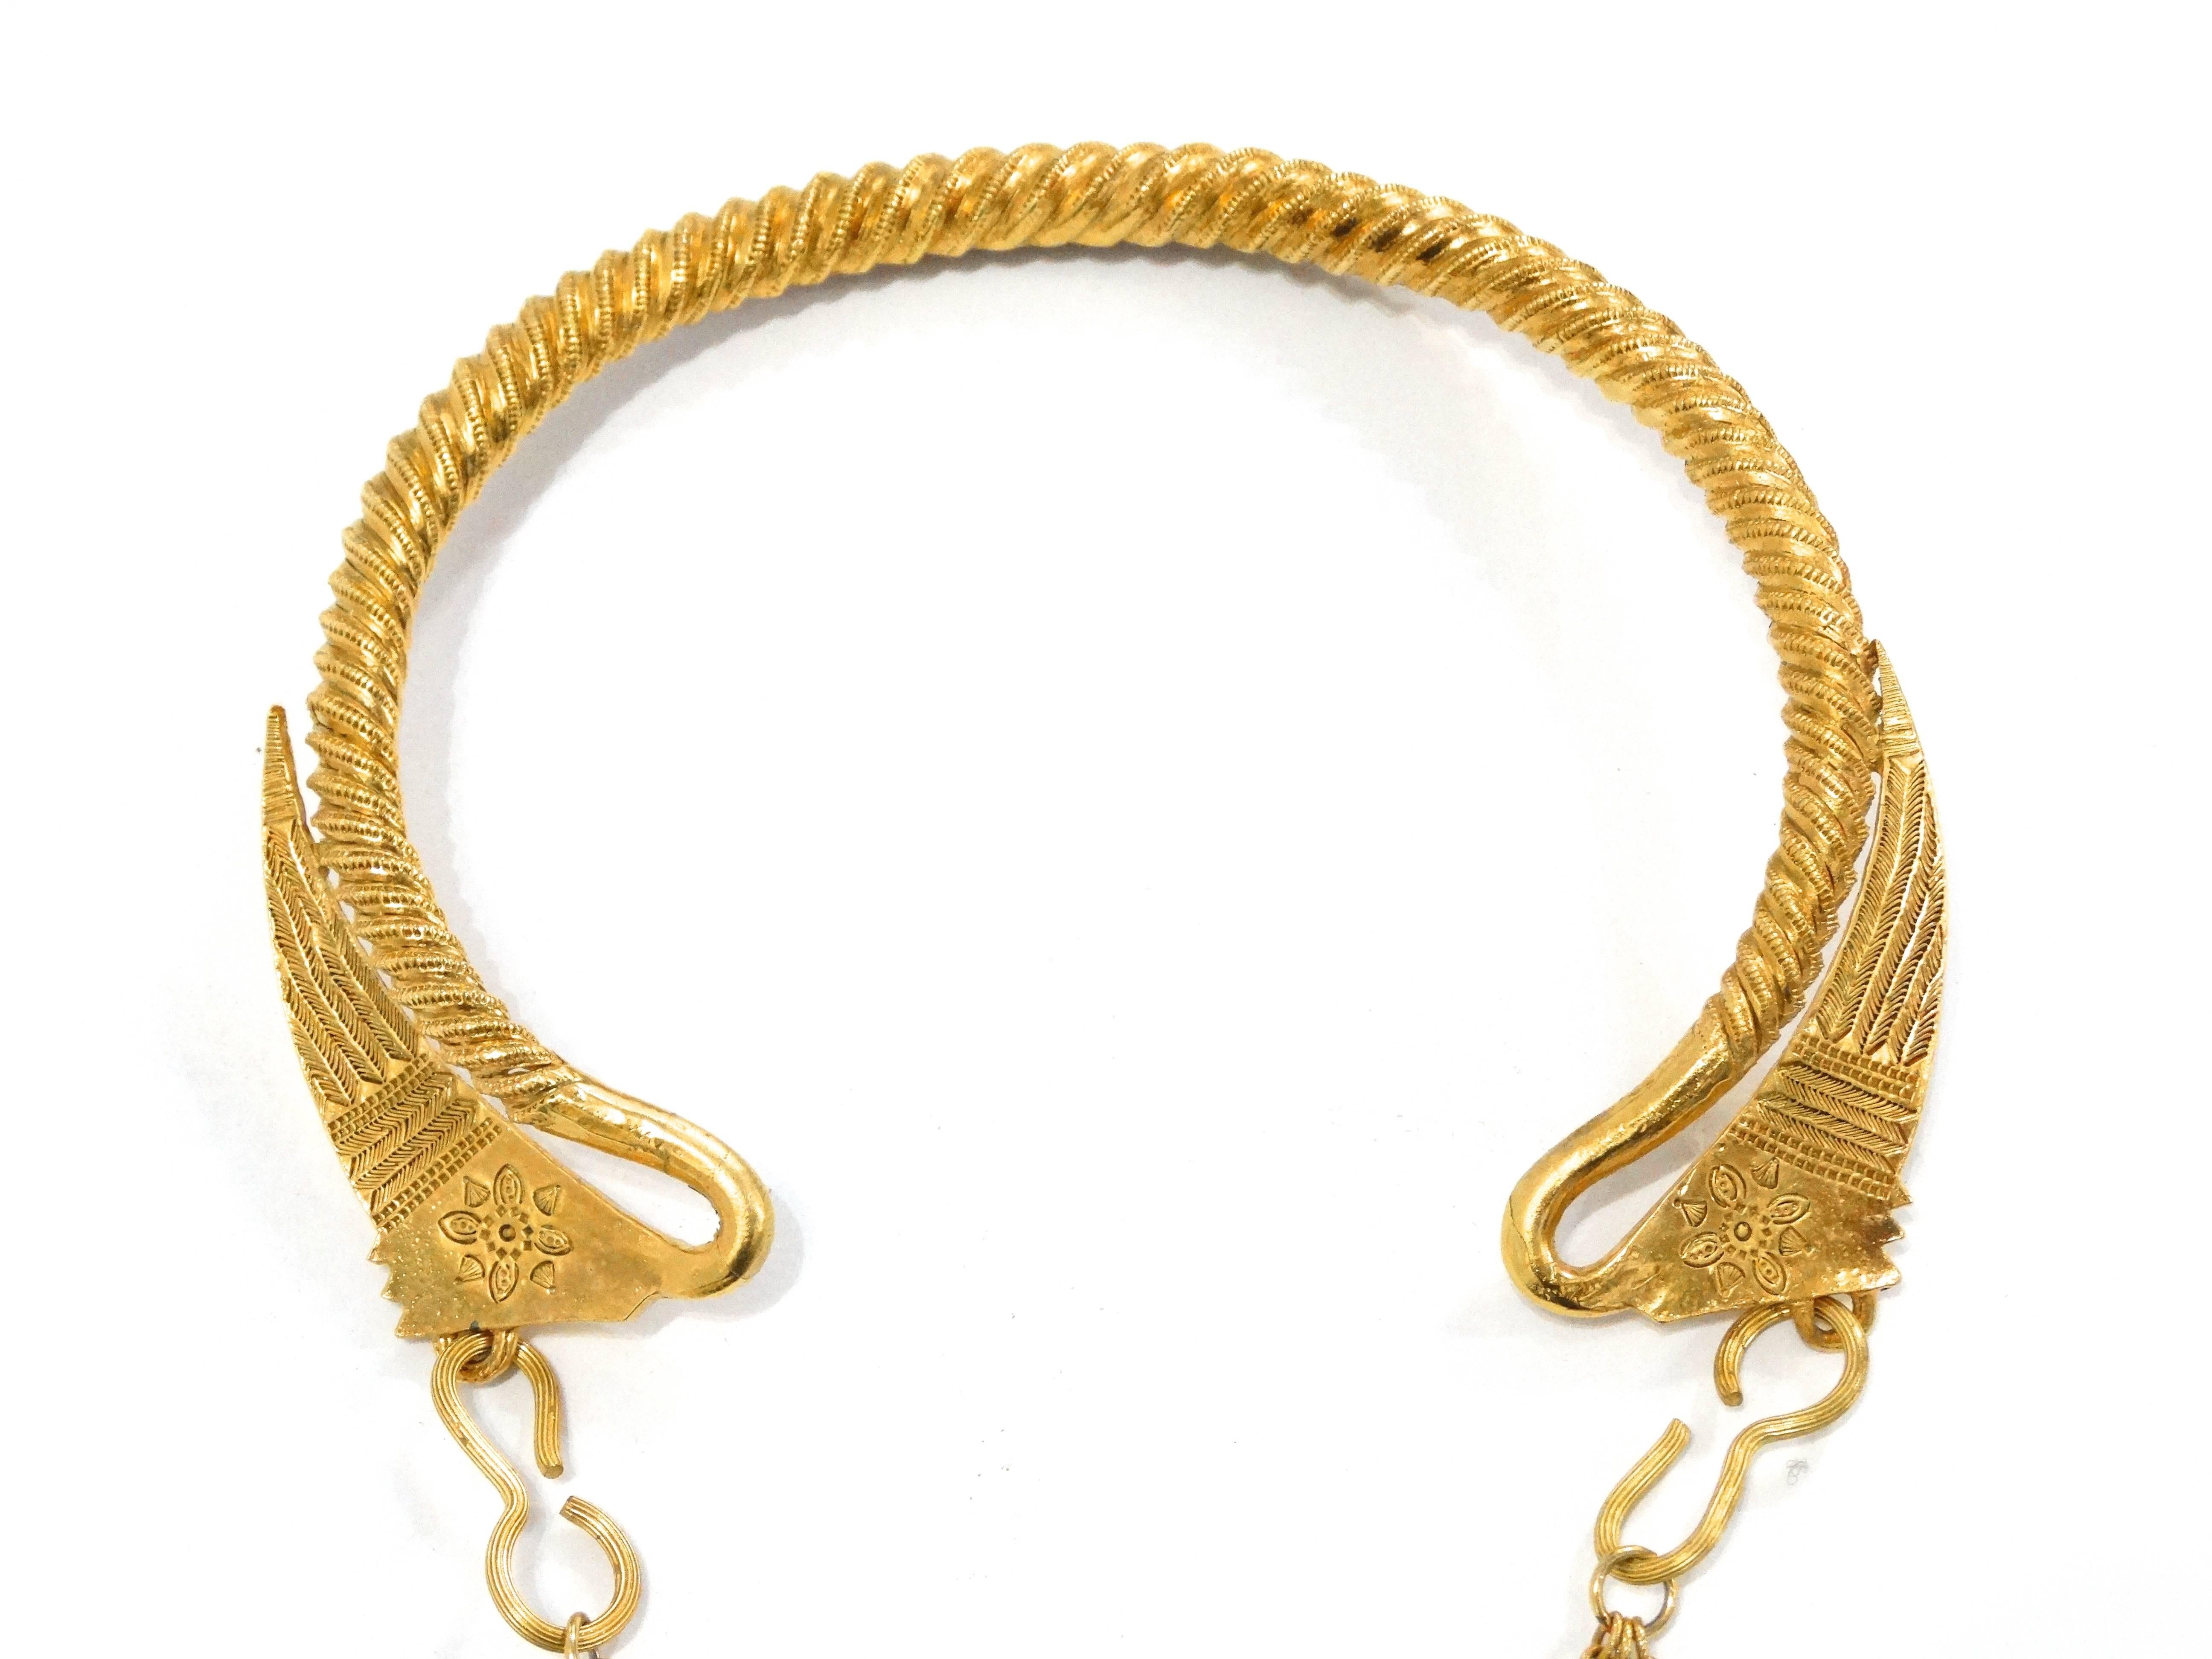 Stunning Alexis Kirk three tiered Egyptian Revial collar necklace. Glorious drops, each with fantastic symmetrical revial designed motifs. Collar necklace with side hooks for putting on and taking off. A beautiful statement piece. Plated Gold ,